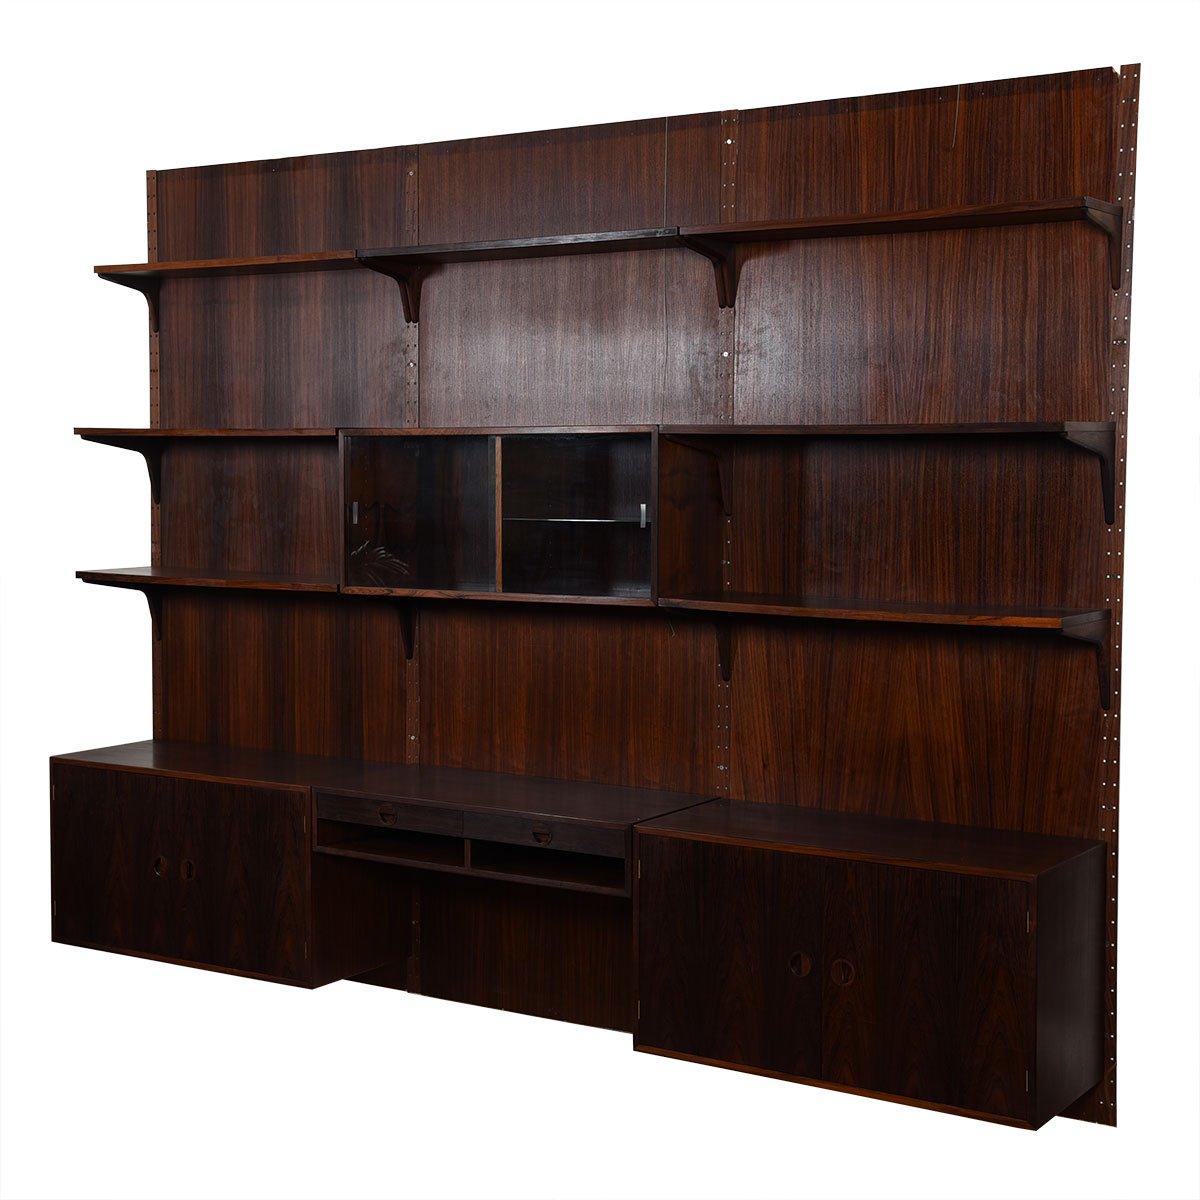 Includes the original rosewood paneling with stunning grain. The paneling does not have to be used to hang the unit, but to not use it would be to miss out on the true beauty of the rosewood. Two deep storage cabinets w/ internal adjustable shelves.